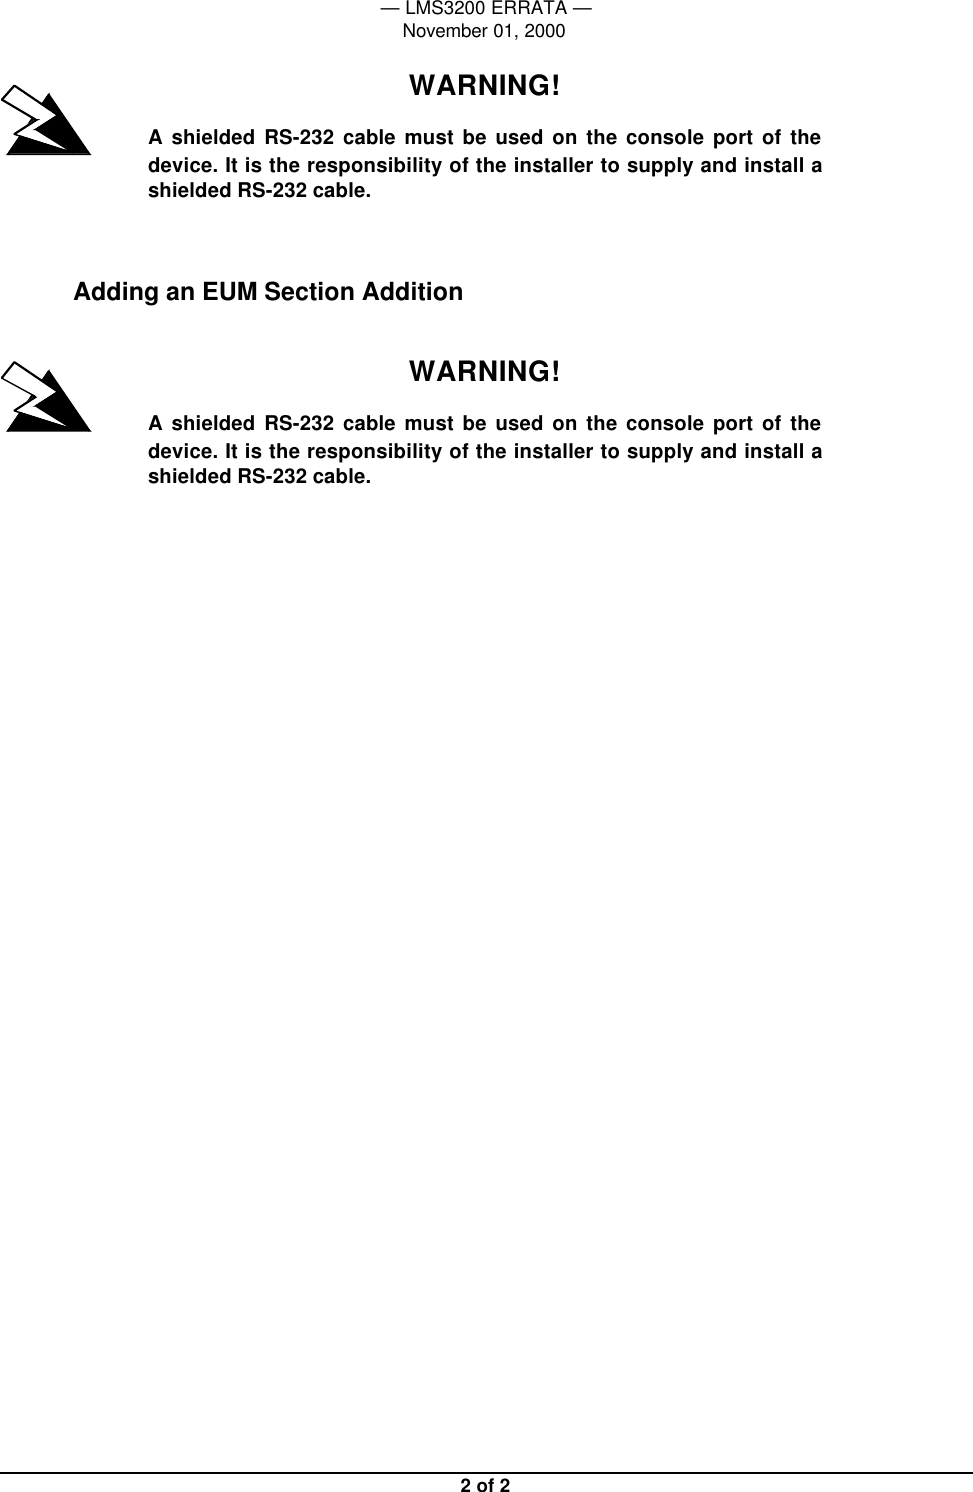 — LMS3200 ERRATA —November 01, 2000 2 of 2WARNING!A shielded RS-232 cable must be used on the console port of thedevice. It is the responsibility of the installer to supply and install ashielded RS-232 cable.Adding an EUM Section AdditionWARNING!A shielded RS-232 cable must be used on the console port of thedevice. It is the responsibility of the installer to supply and install ashielded RS-232 cable.